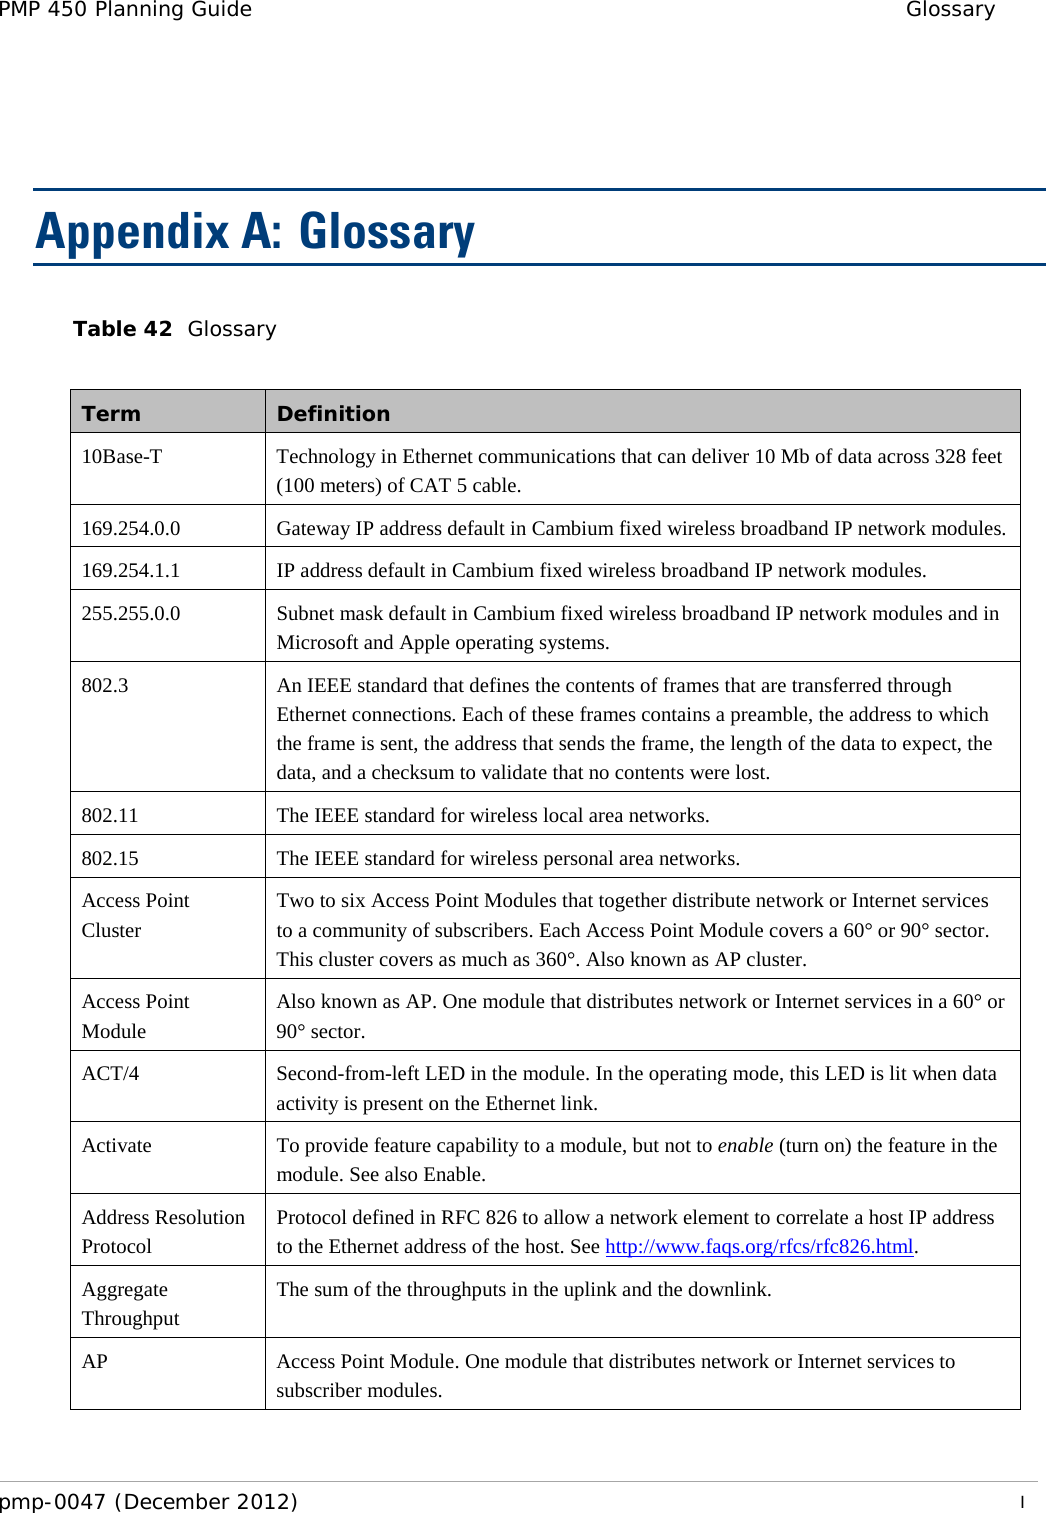 PMP 450 Planning Guide Glossary   pmp-0047 (December 2012)   I  Appendix A:  Glossary Table 42  Glossary  Term Definition 10Base-T  Technology in Ethernet communications that can deliver 10 Mb of data across 328 feet (100 meters) of CAT 5 cable. 169.254.0.0 Gateway IP address default in Cambium fixed wireless broadband IP network modules. 169.254.1.1 IP address default in Cambium fixed wireless broadband IP network modules. 255.255.0.0 Subnet mask default in Cambium fixed wireless broadband IP network modules and in Microsoft and Apple operating systems. 802.3 An IEEE standard that defines the contents of frames that are transferred through Ethernet connections. Each of these frames contains a preamble, the address to which the frame is sent, the address that sends the frame, the length of the data to expect, the data, and a checksum to validate that no contents were lost. 802.11 The IEEE standard for wireless local area networks. 802.15 The IEEE standard for wireless personal area networks. Access Point Cluster Two to six Access Point Modules that together distribute network or Internet services to a community of subscribers. Each Access Point Module covers a 60° or 90° sector. This cluster covers as much as 360°. Also known as AP cluster. Access Point Module Also known as AP. One module that distributes network or Internet services in a 60° or 90° sector. ACT/4 Second-from-left LED in the module. In the operating mode, this LED is lit when data activity is present on the Ethernet link. Activate To provide feature capability to a module, but not to enable (turn on) the feature in the module. See also Enable. Address Resolution Protocol Protocol defined in RFC 826 to allow a network element to correlate a host IP address to the Ethernet address of the host. See http://www.faqs.org/rfcs/rfc826.html. Aggregate Throughput The sum of the throughputs in the uplink and the downlink. AP Access Point Module. One module that distributes network or Internet services to subscriber modules. 